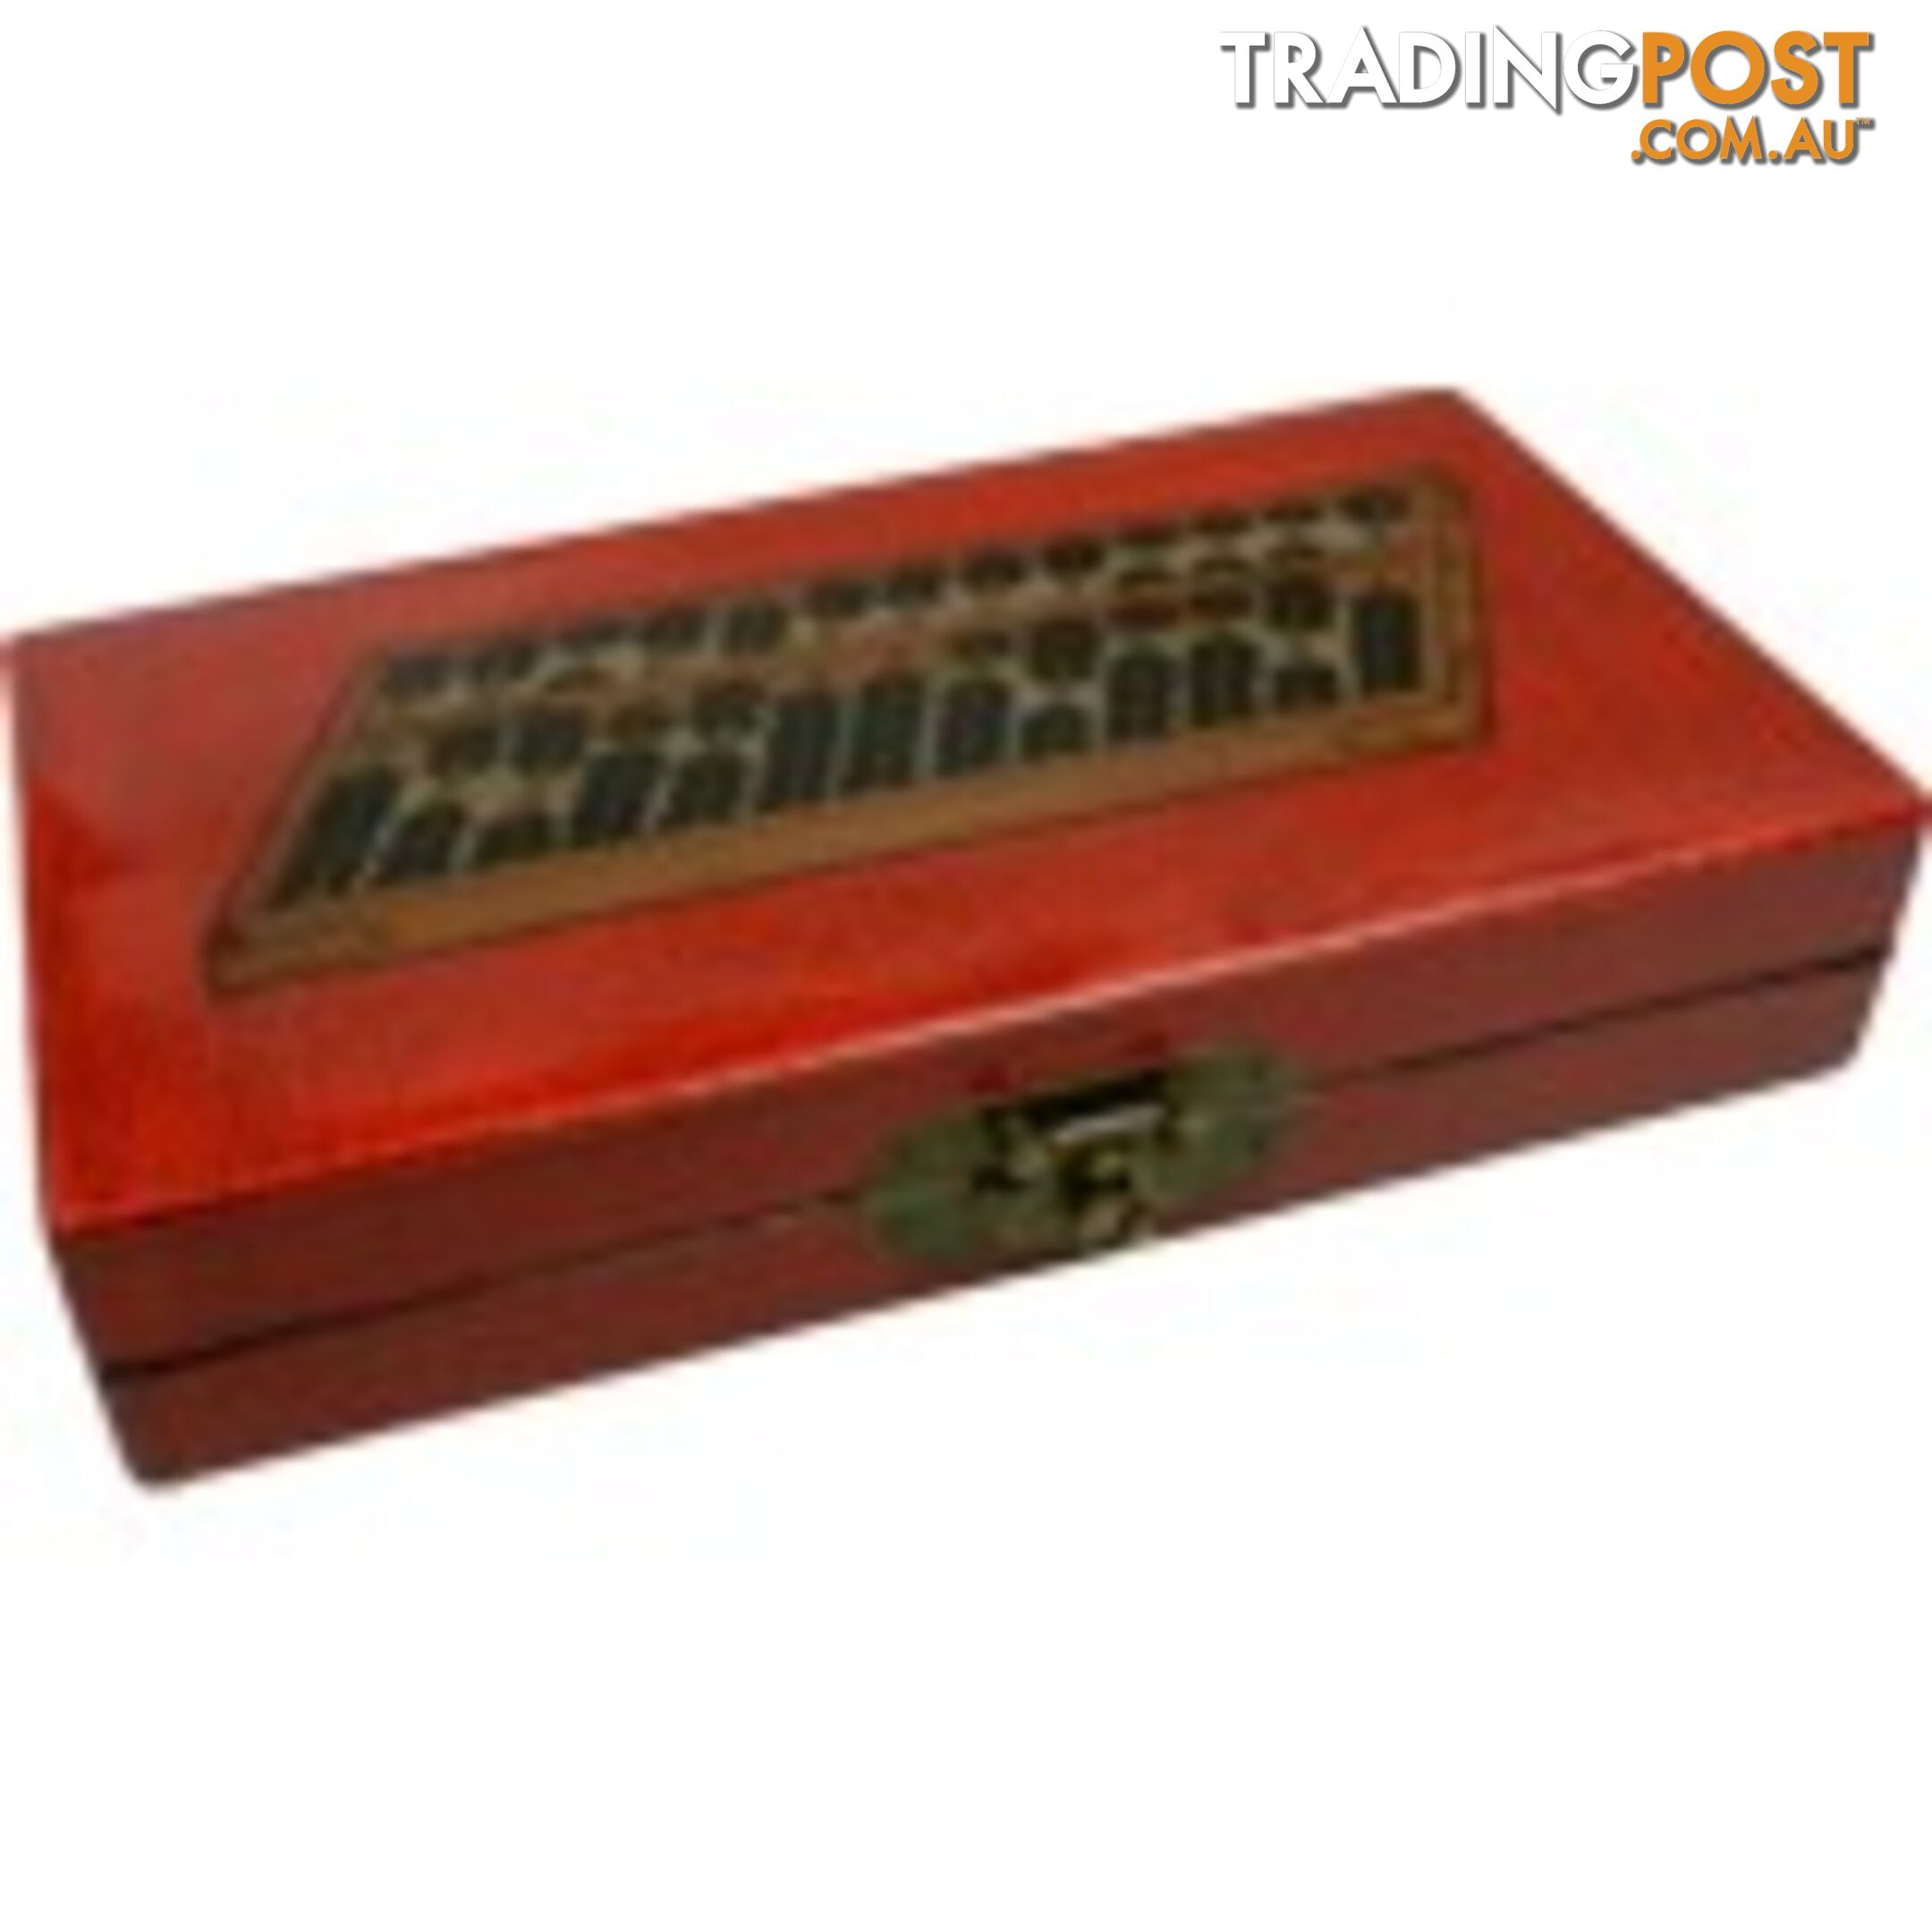 Chinese Abacus in Red Painted Box